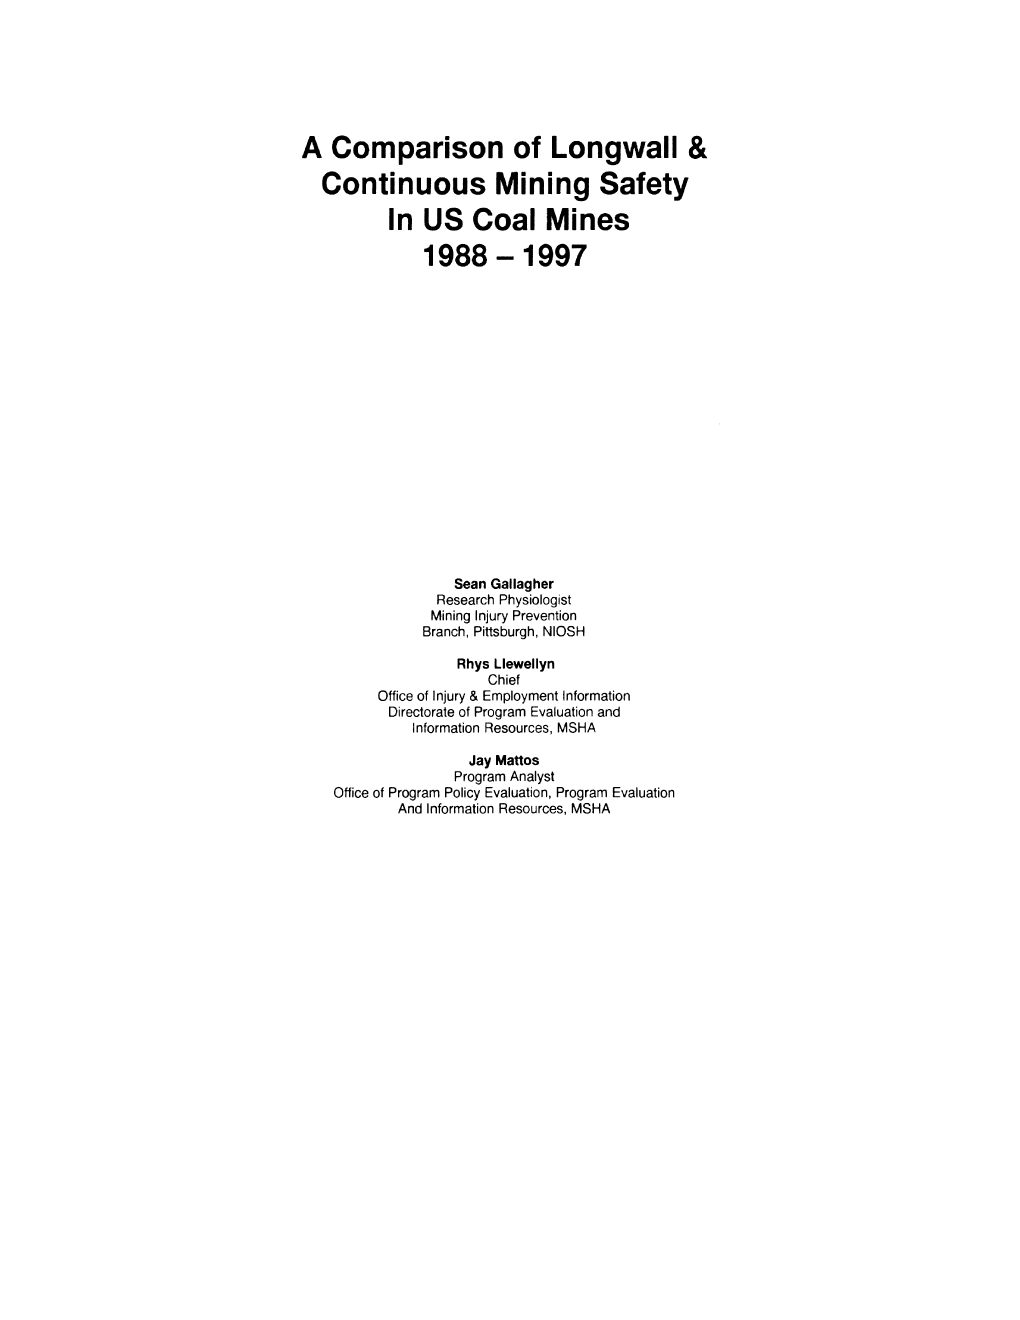 A Comparison of Longwall & Continuous Mining Safety in US